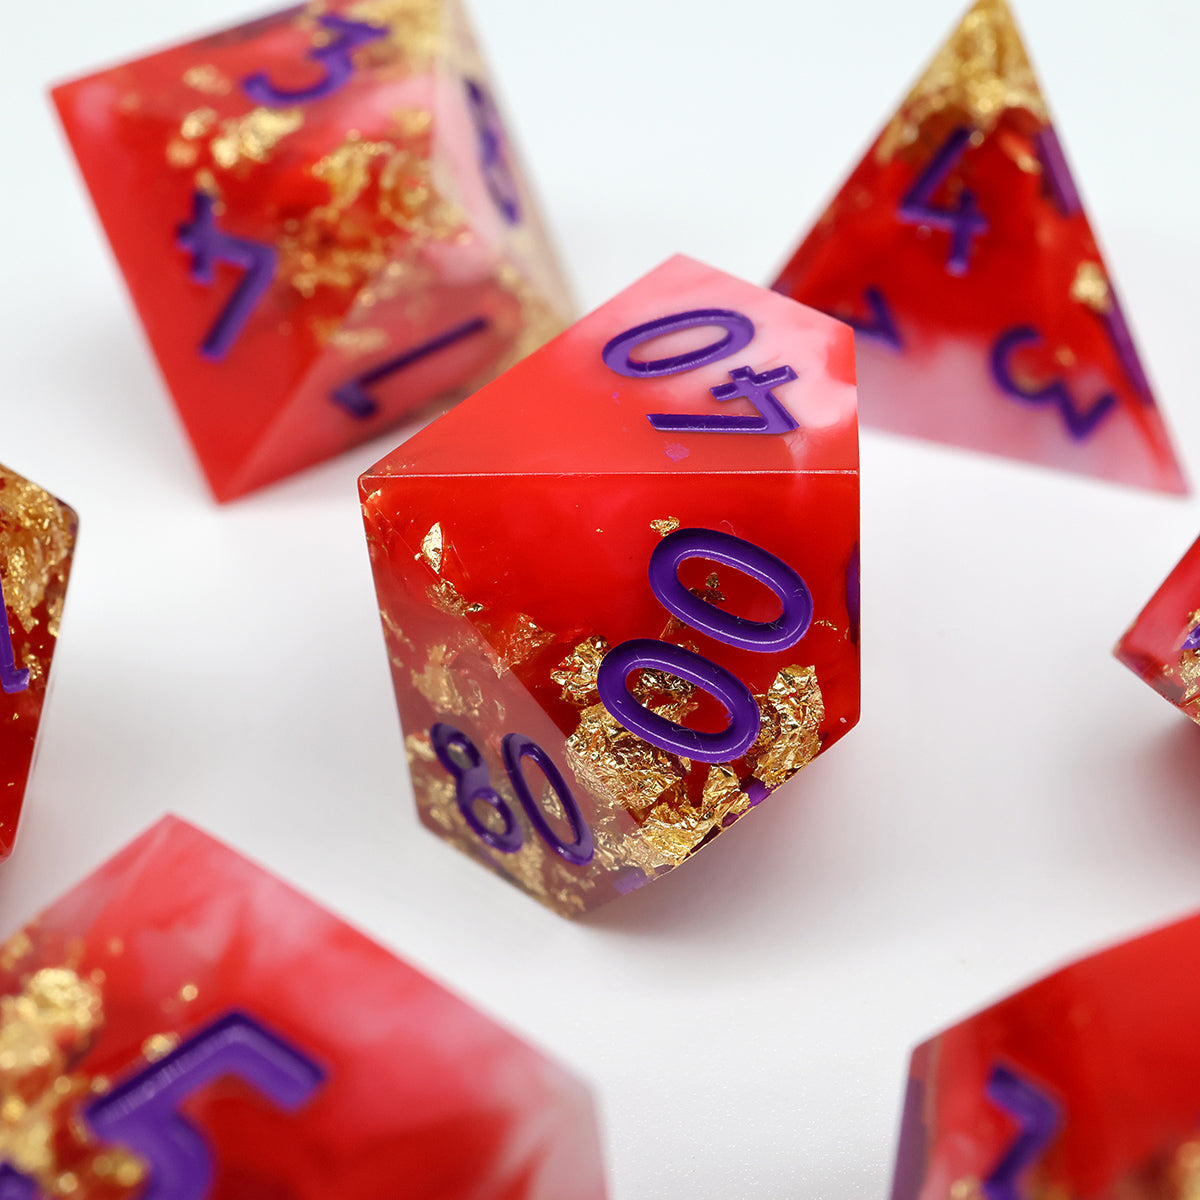 sharp edge dnd, TTRPG dice sets for role playing games, dice goblin collectors